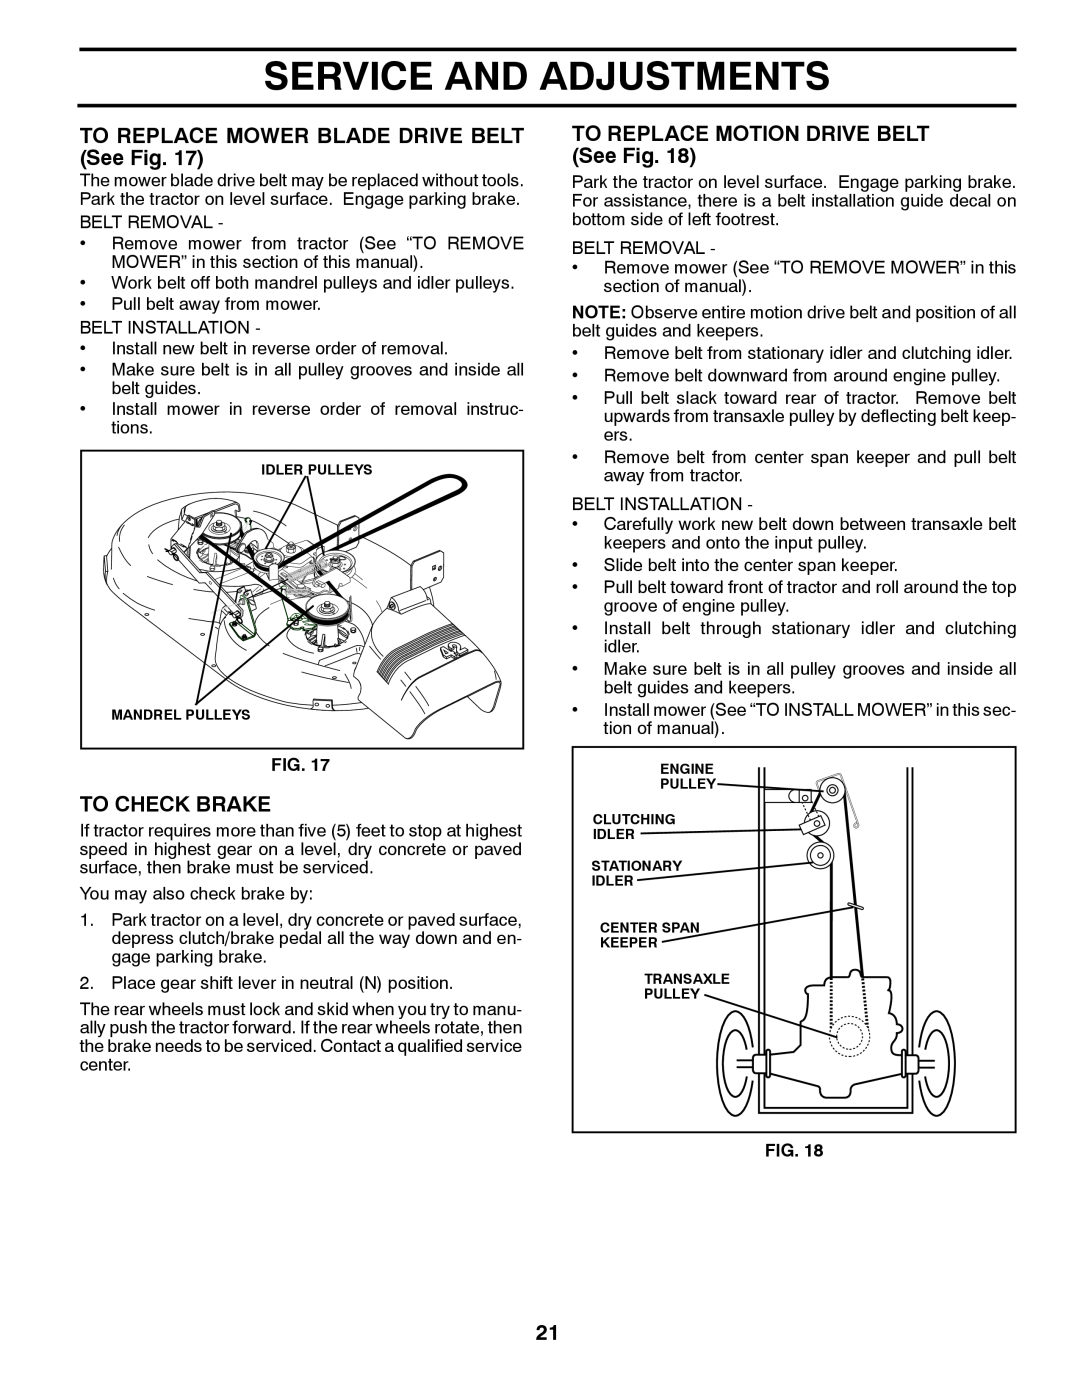 Poulan PO18542LT manual TO REPLACE MOWER BLADE DRIVE BELT See Fig, To Check Brake, TO REPLACE MOTION DRIVE BELT See Fig 